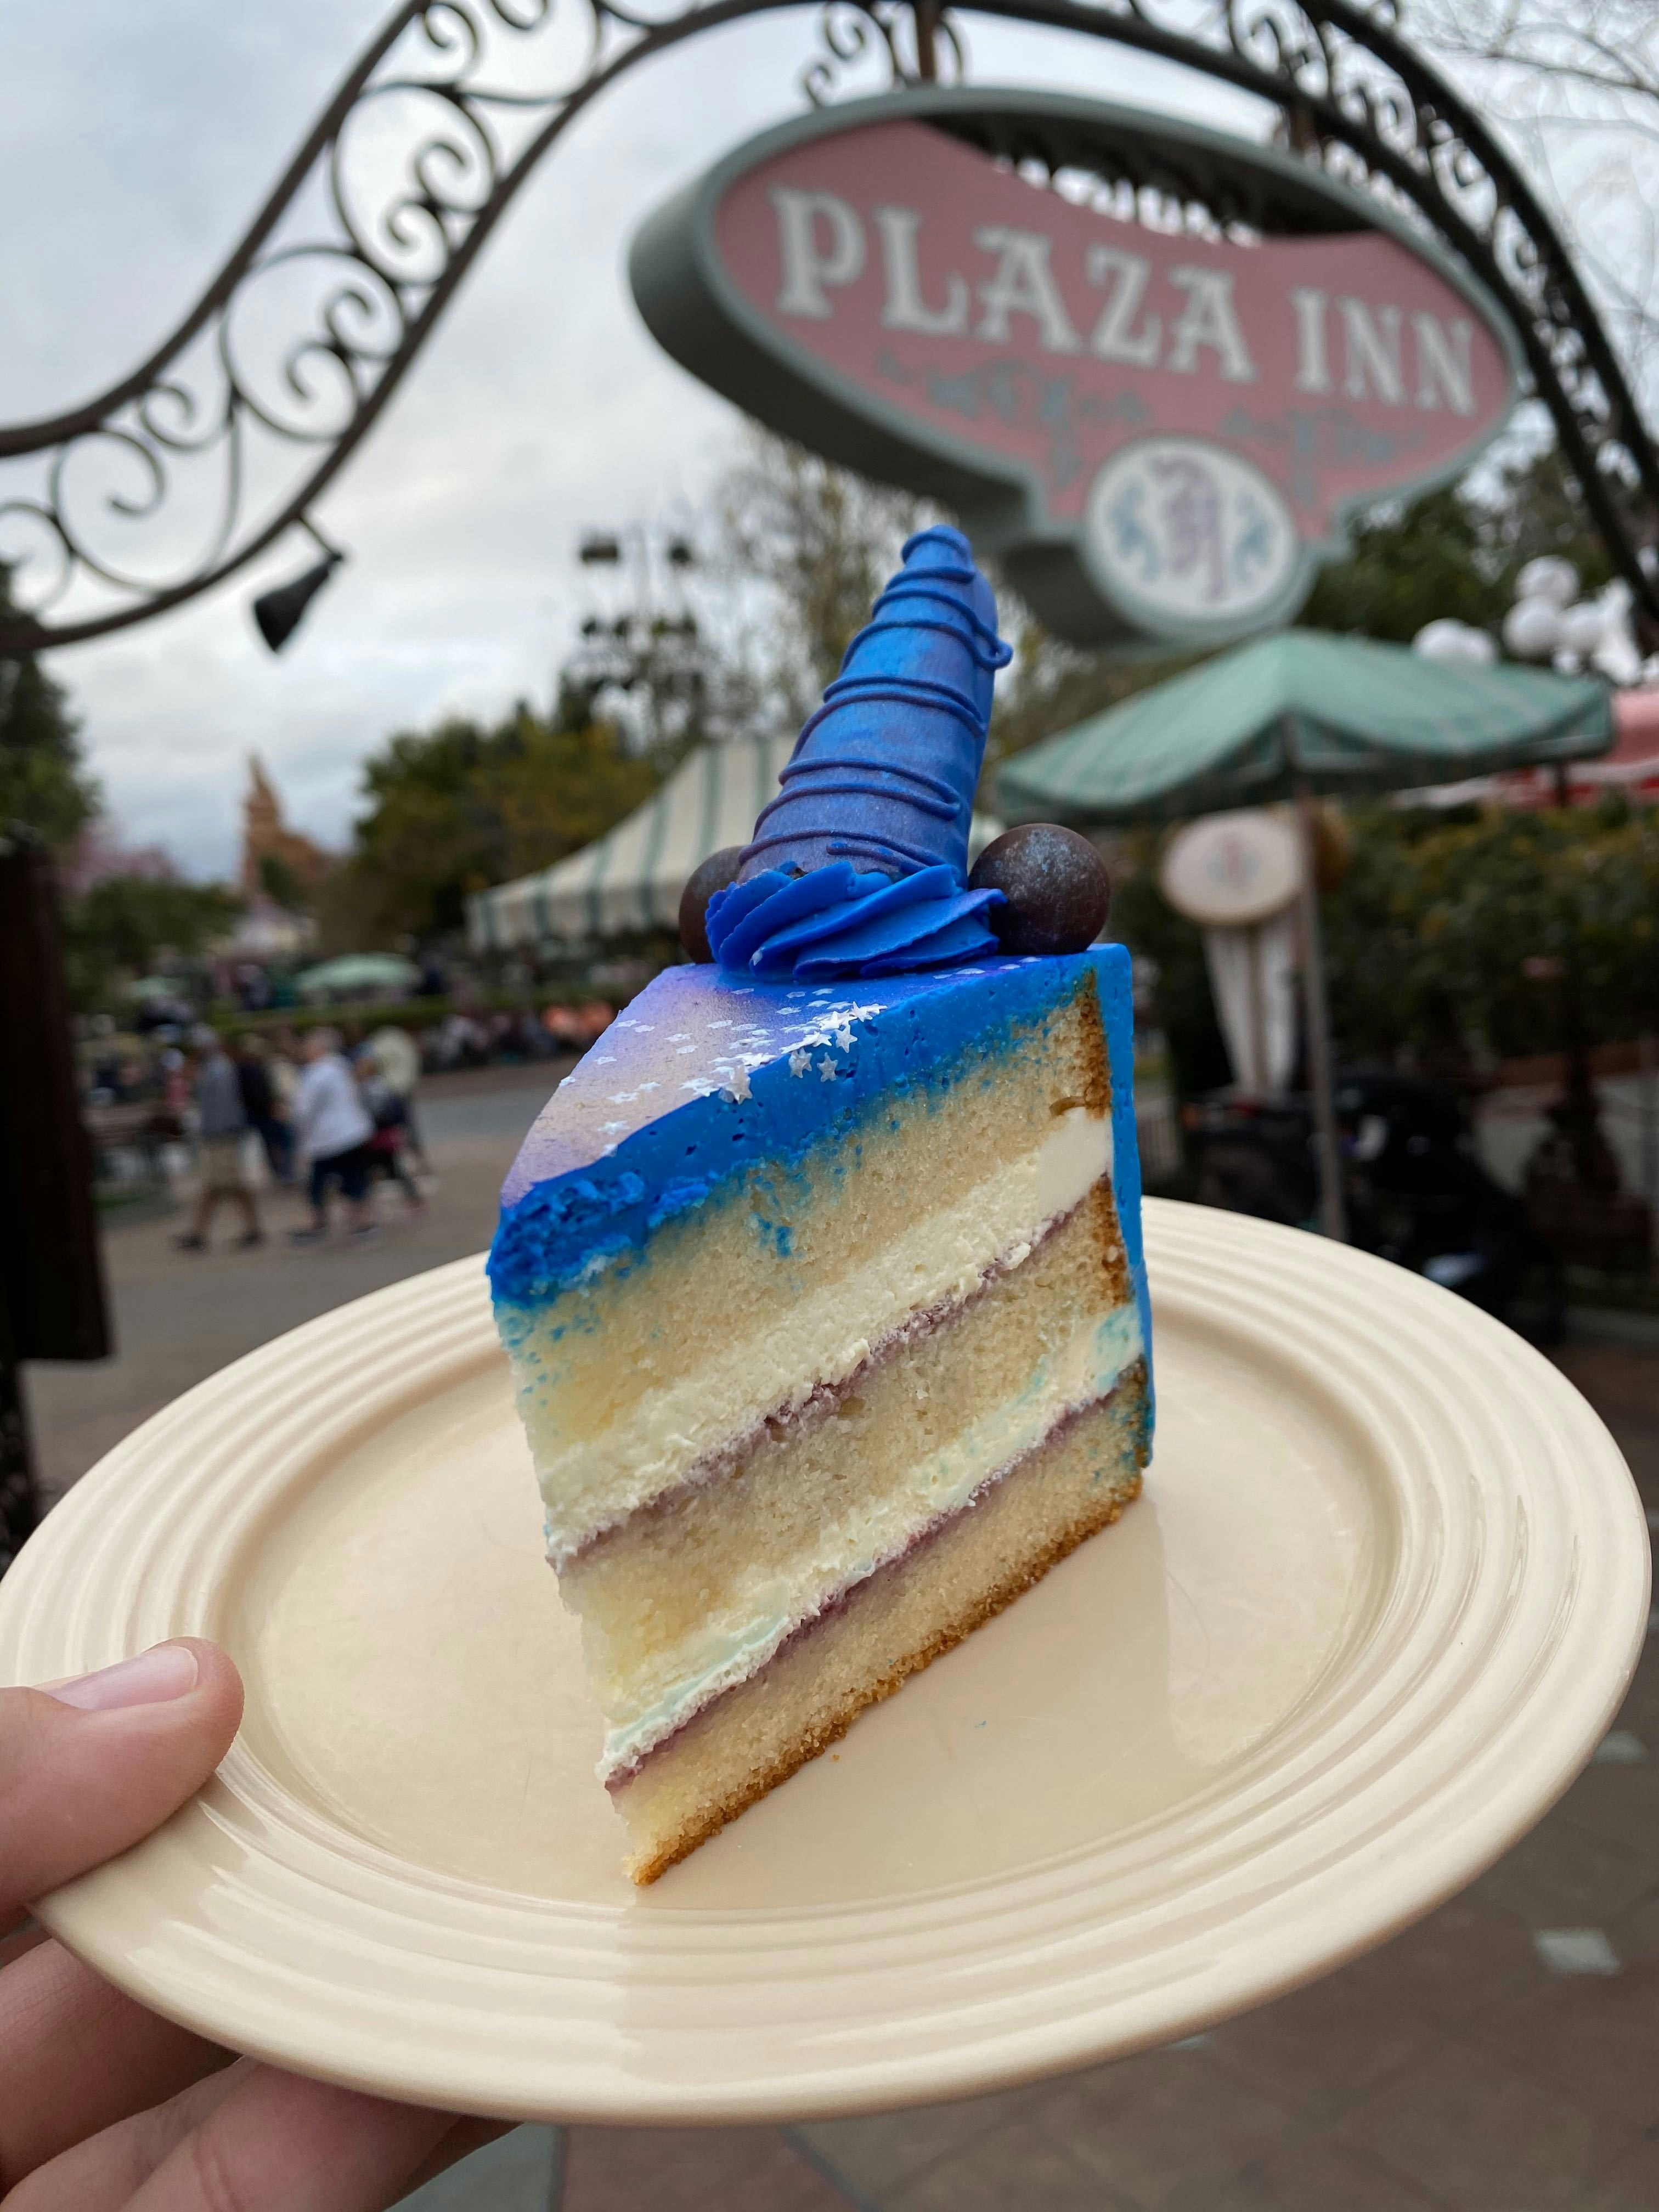 review-new-magic-happens-sorcerer-mickey-layer-cake-at-the-plaza-inn